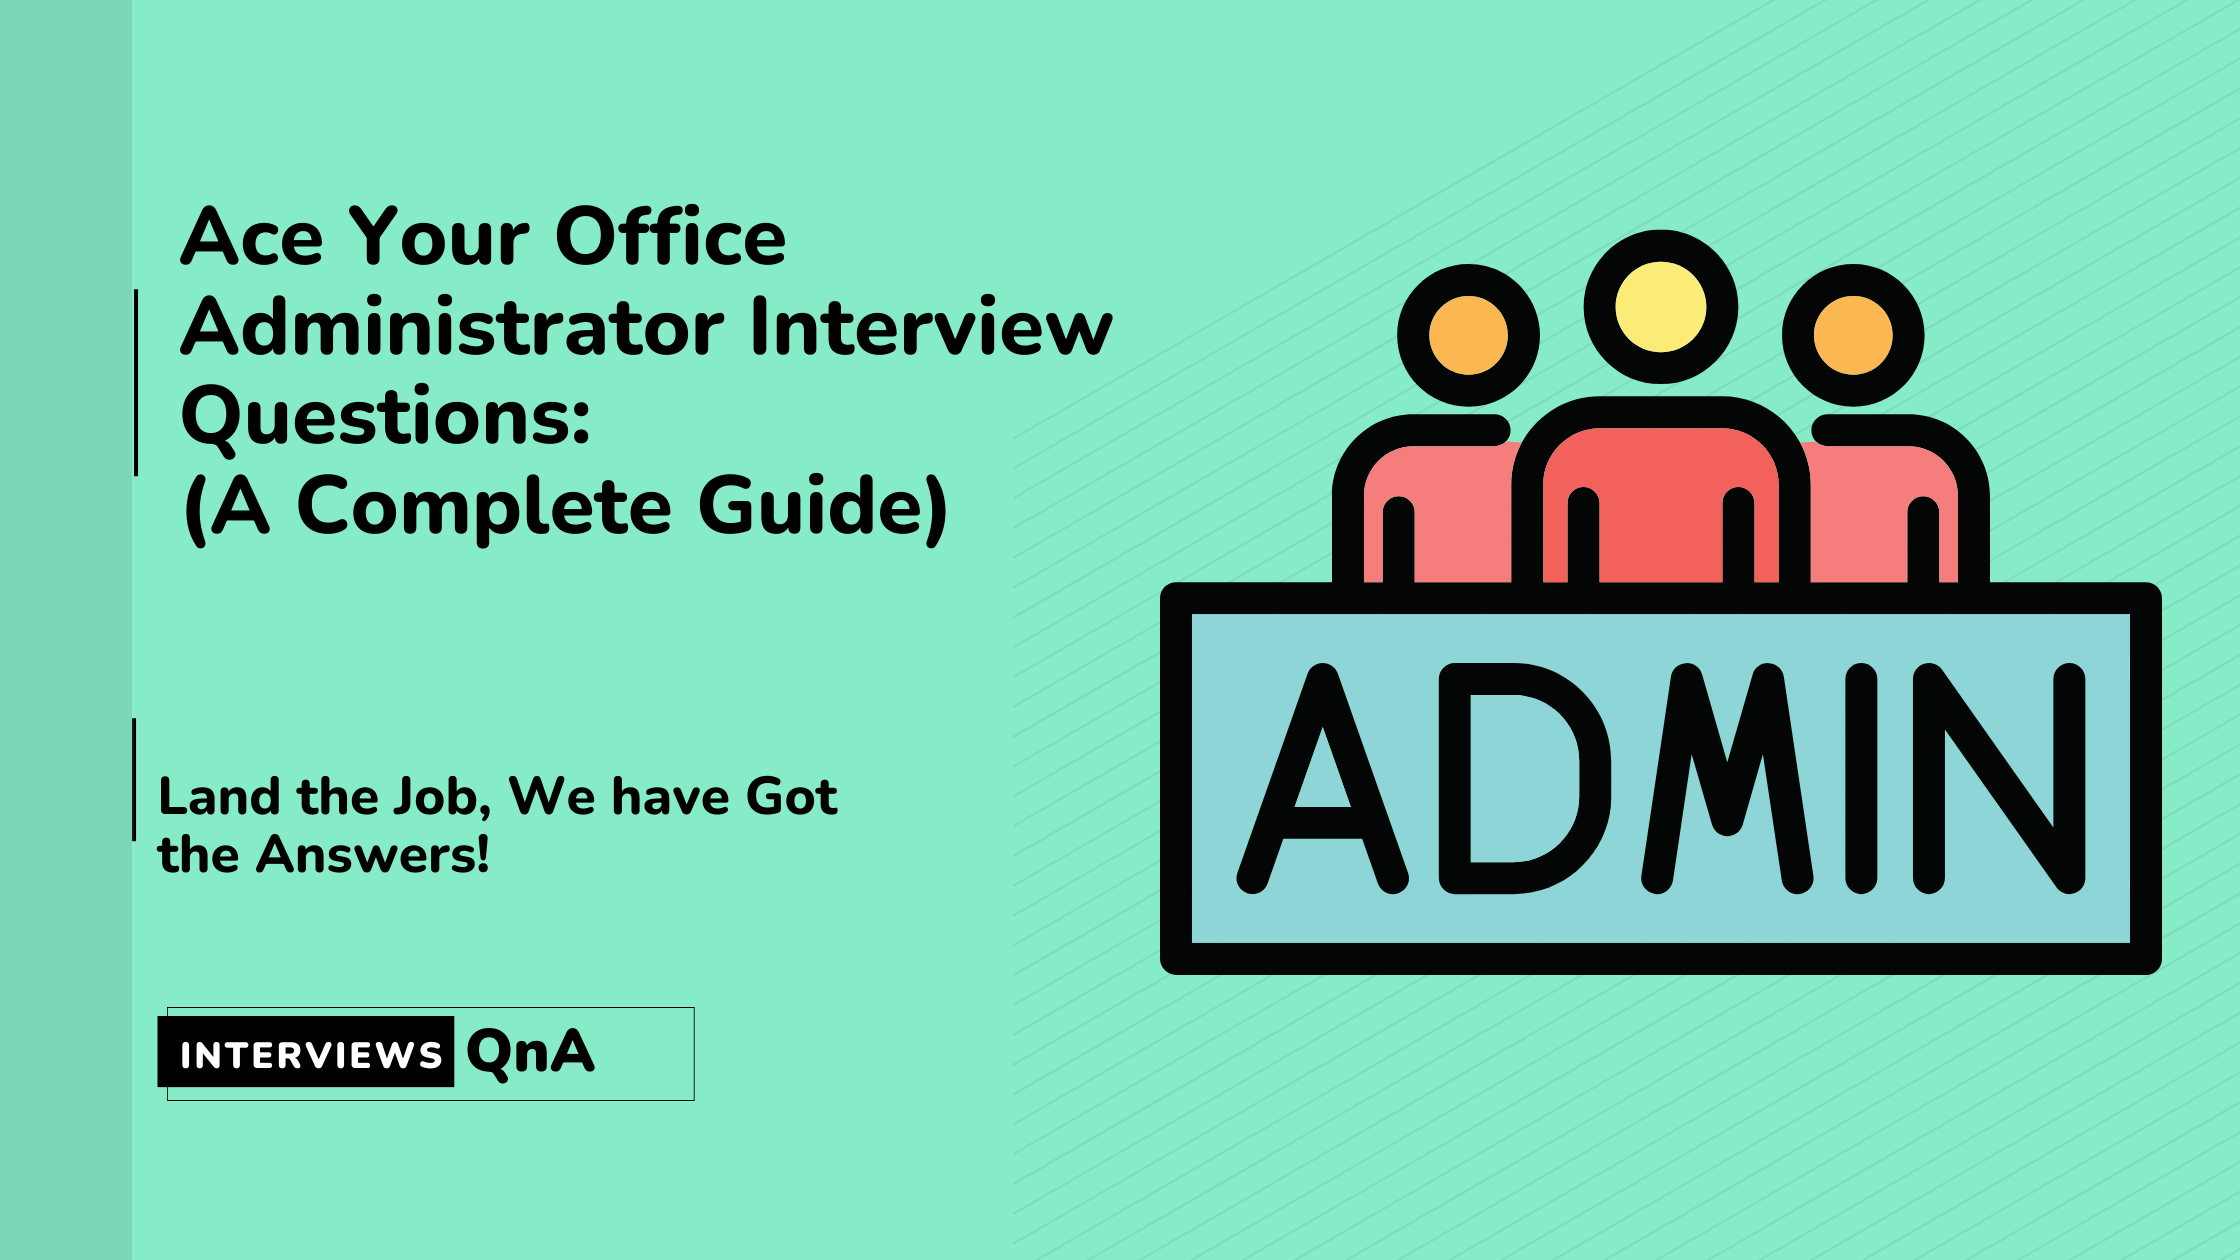 Ace Your Office Administrator Interview Questions: (A Complete Guide)